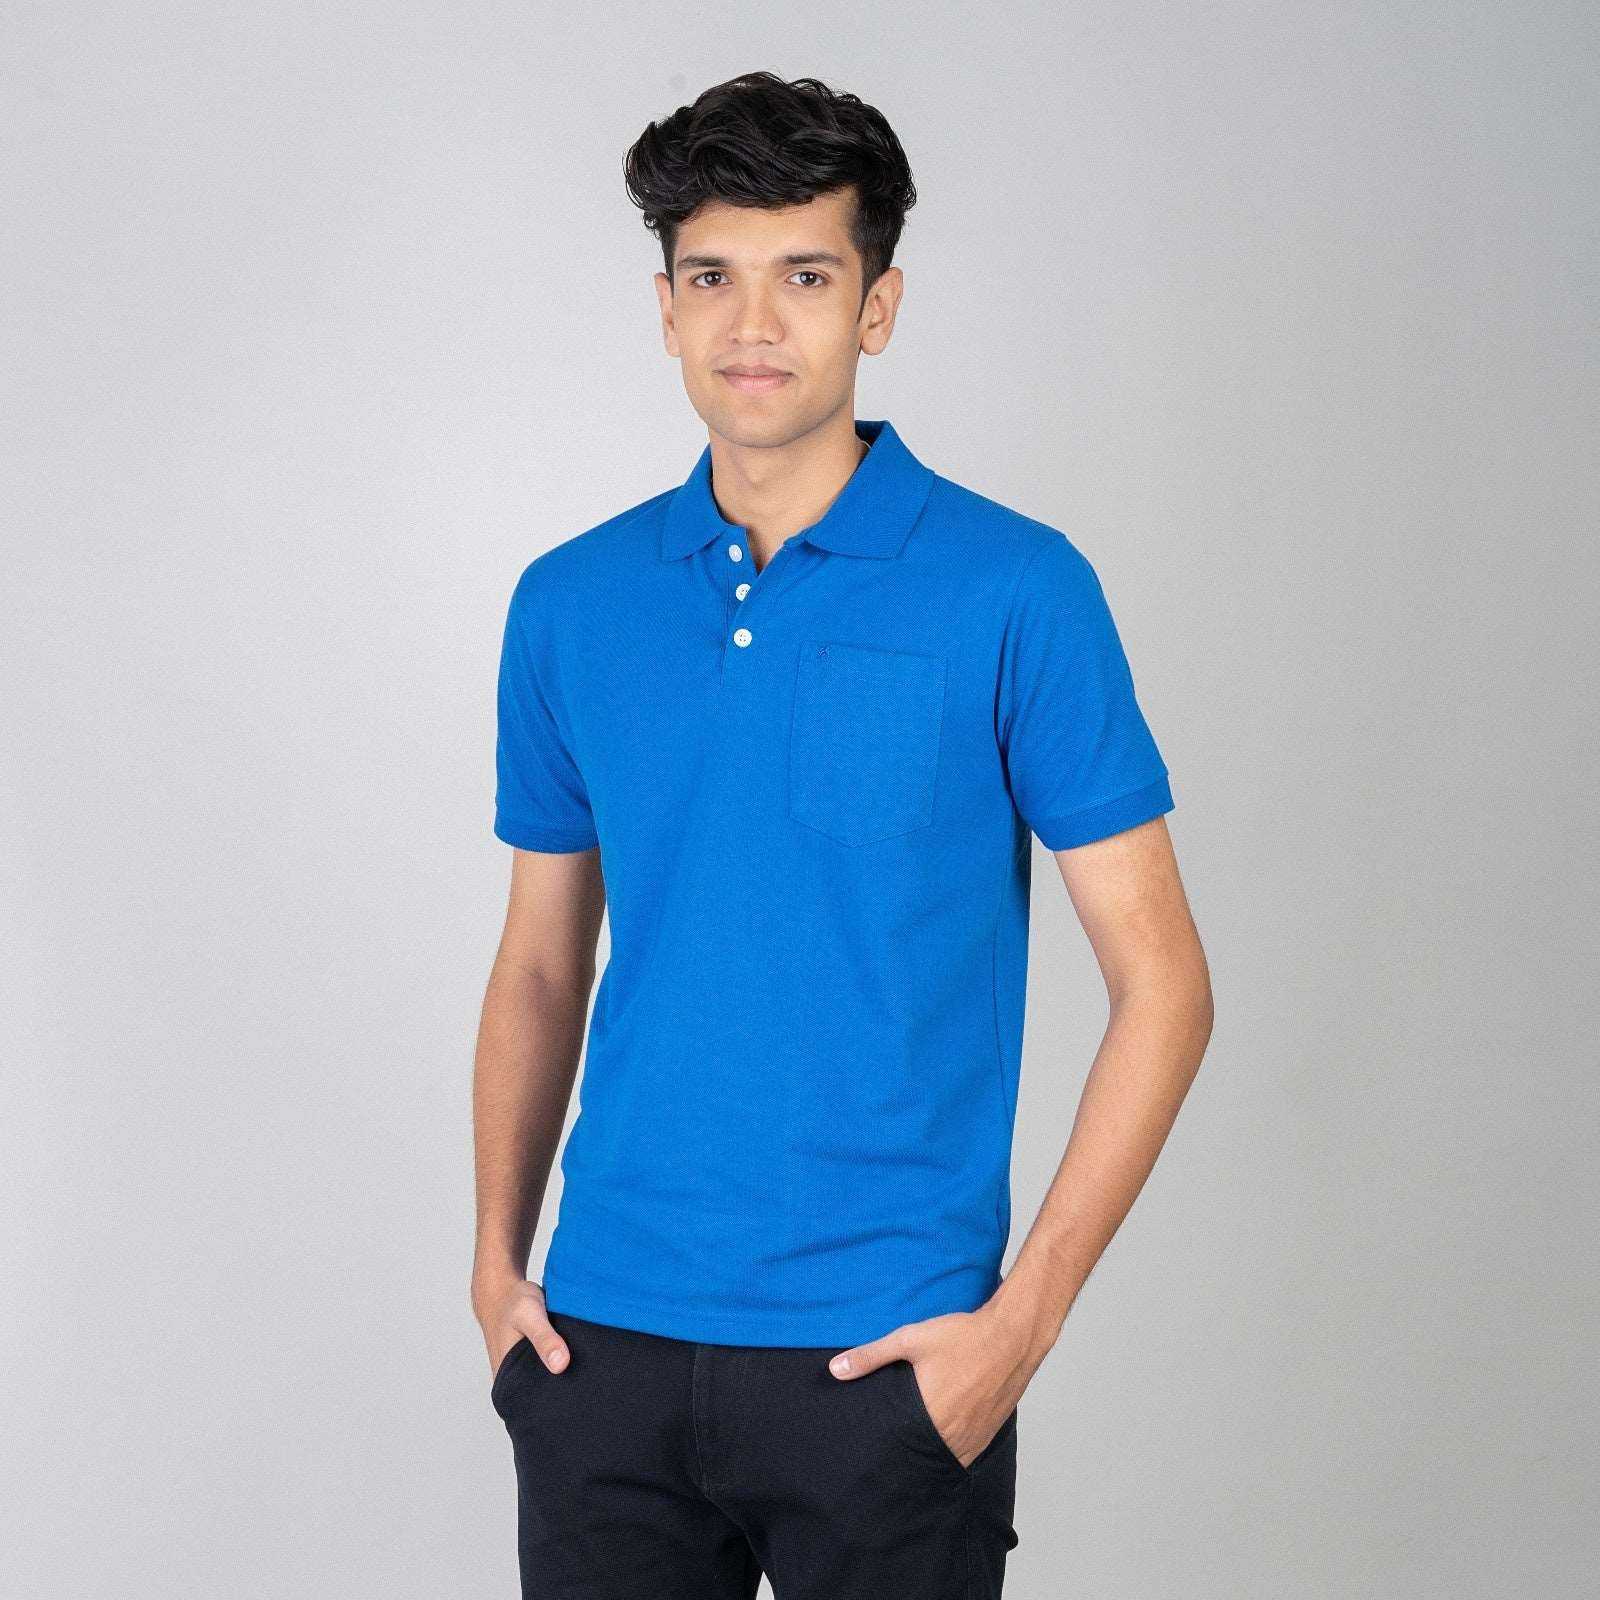 Polo T-shirt with Pocket - Navy Blue